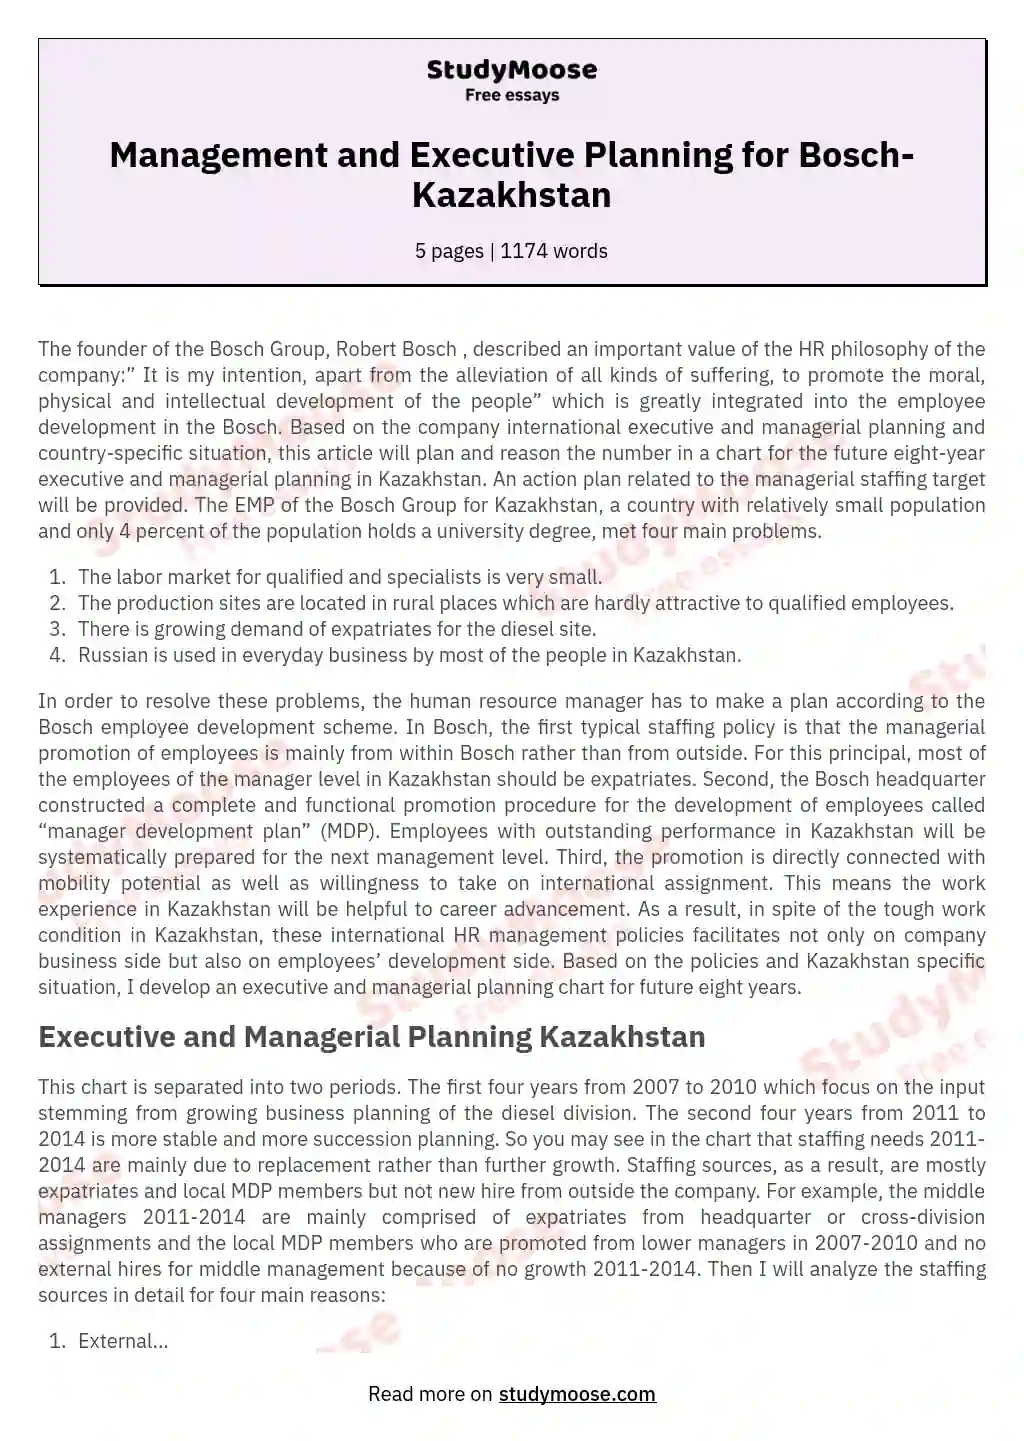 Management and Executive Planning for Bosch-Kazakhstan essay